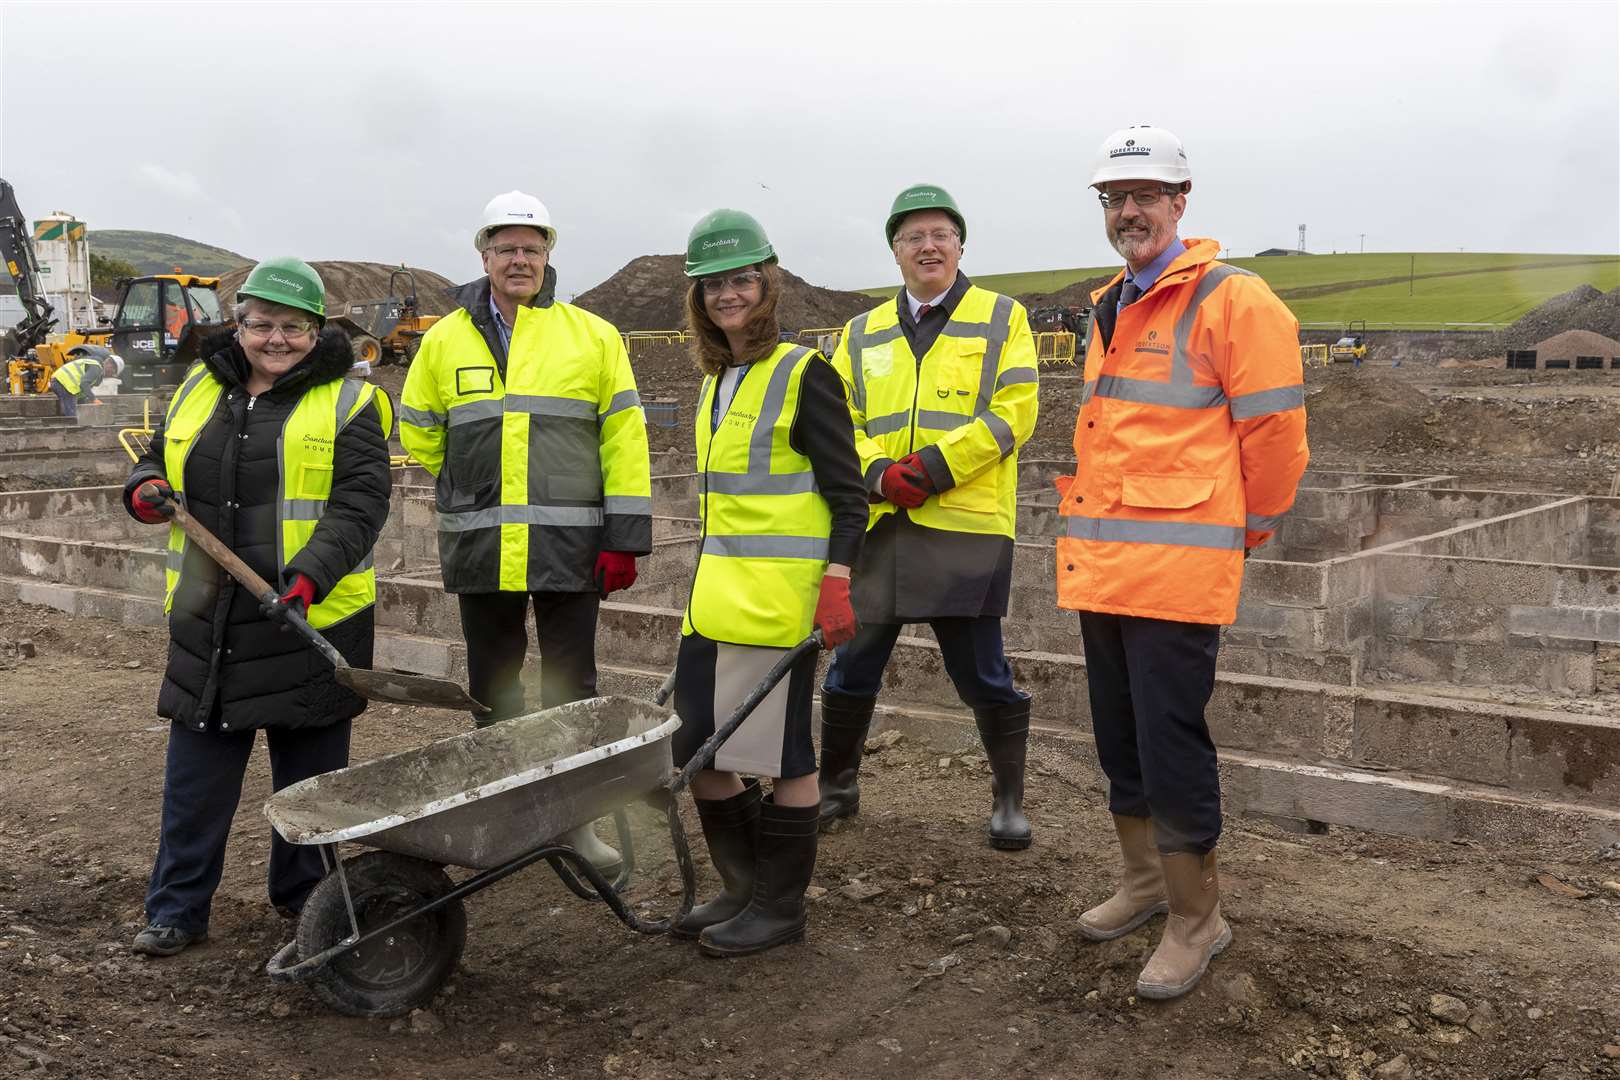 At the event marking the start of work at the social housing development in Portsoy are (from left): Councllor Anne Stirling, Councillor John Cox, Pat Cahill of Sanctury Scotland, Councillor Glen Reynolds and Neil Donald from Robertson Partnership Homes.